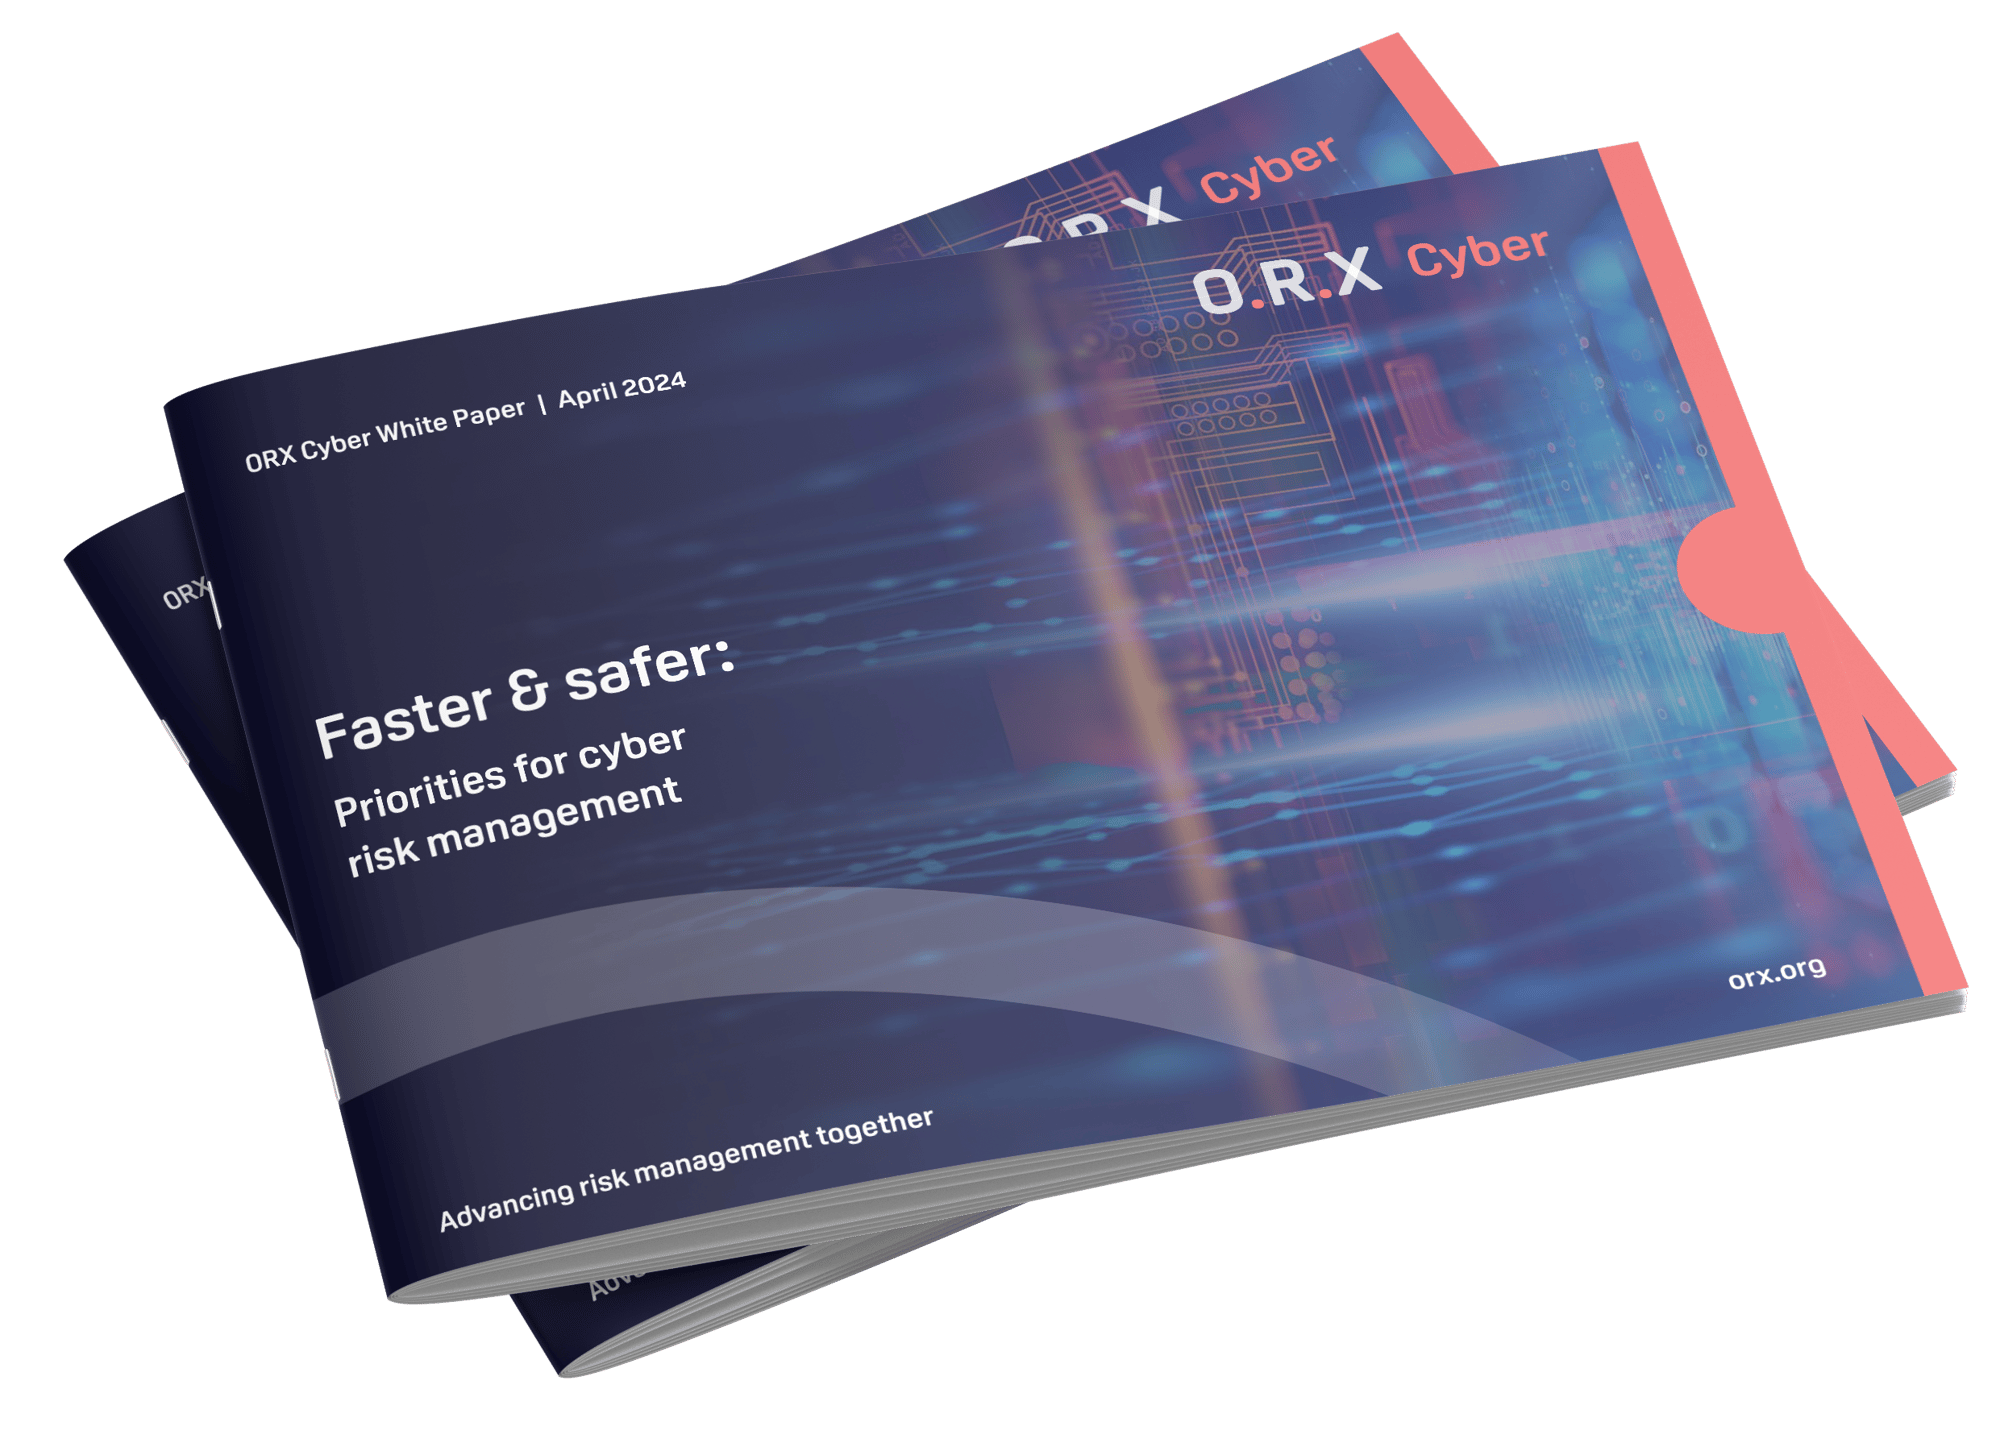 Faster & safer: Priorities for cyber risk management report front cover